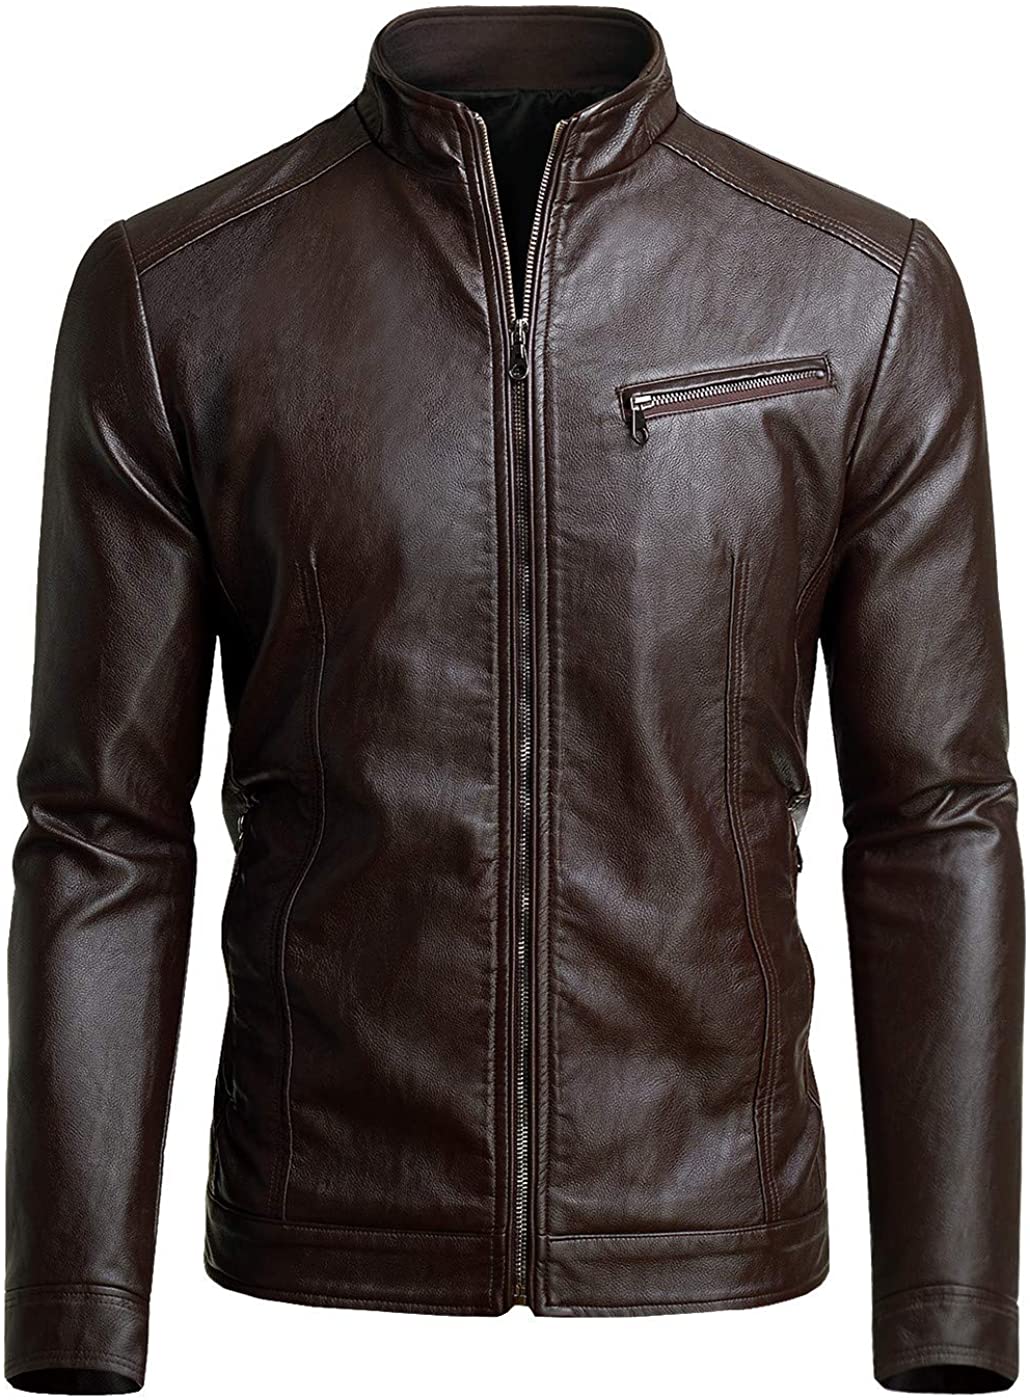 Men's Slim Fit Chocolate Long Sleeve Faux Leather Jacket